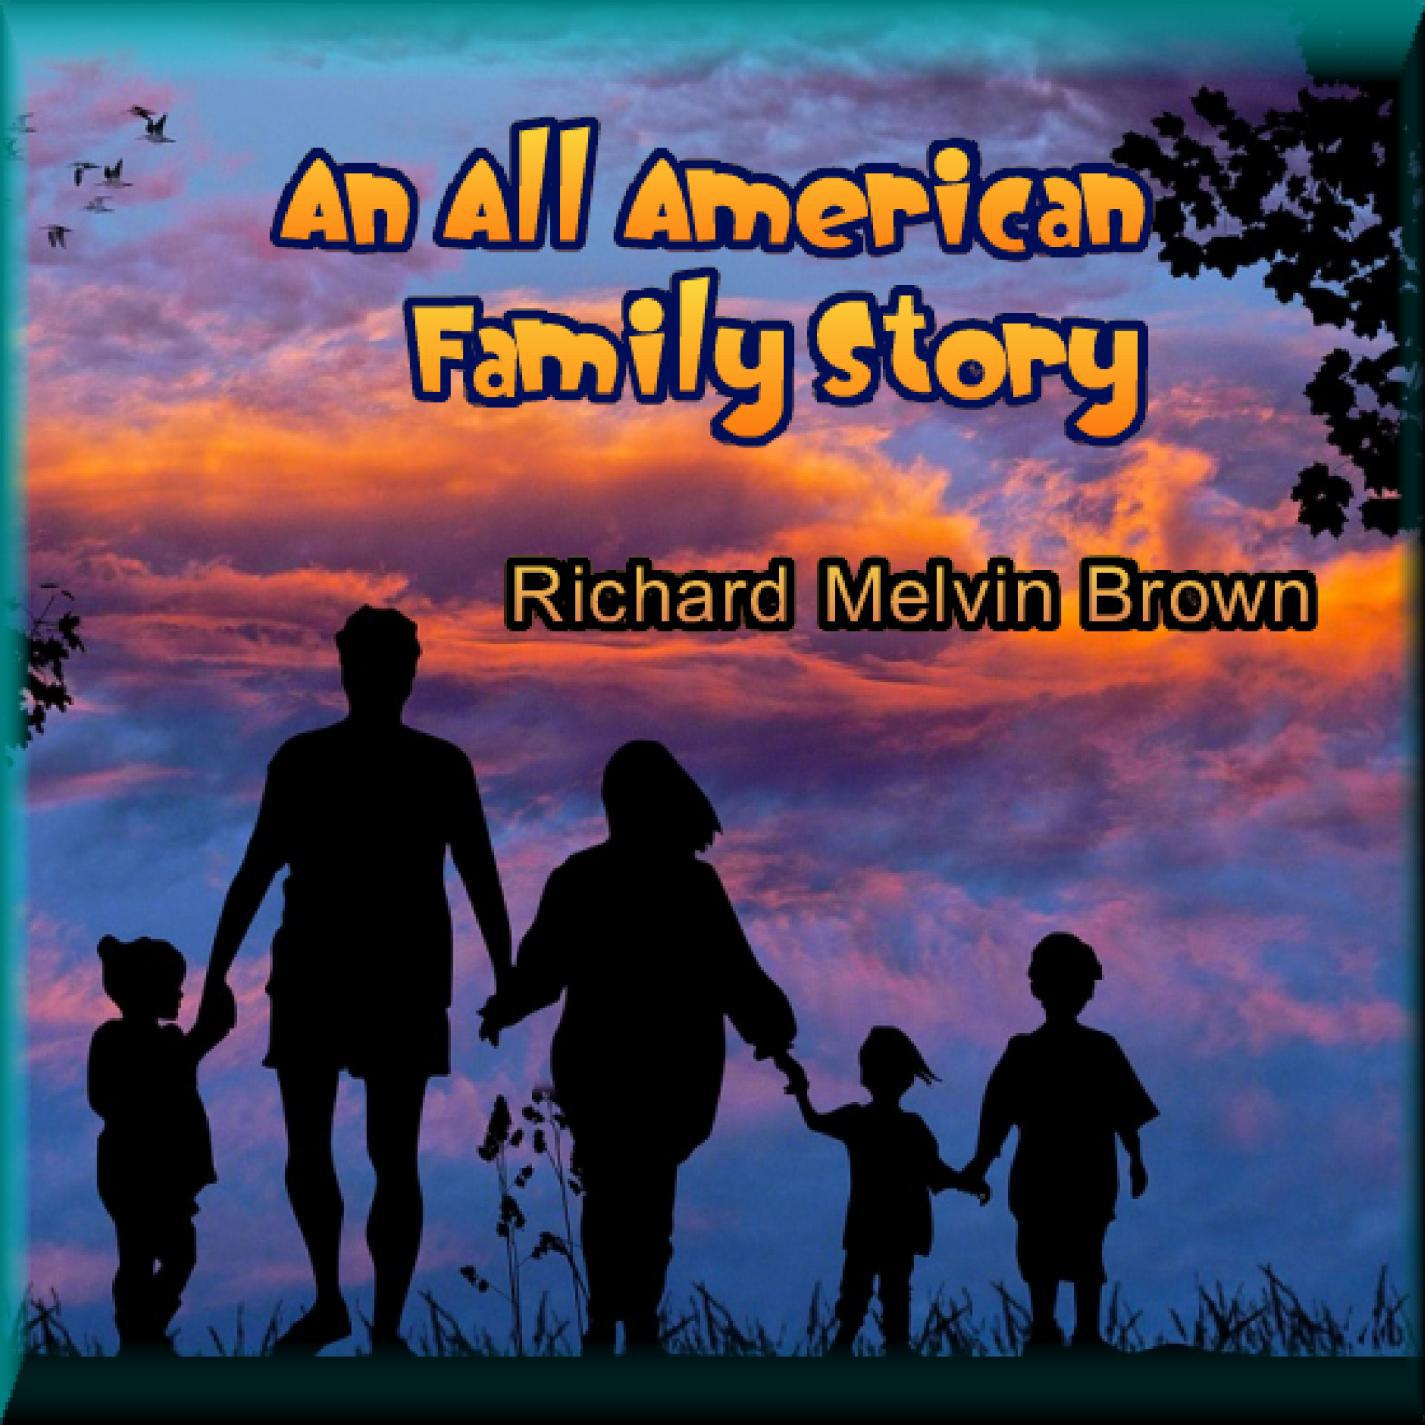 An all American Family Story